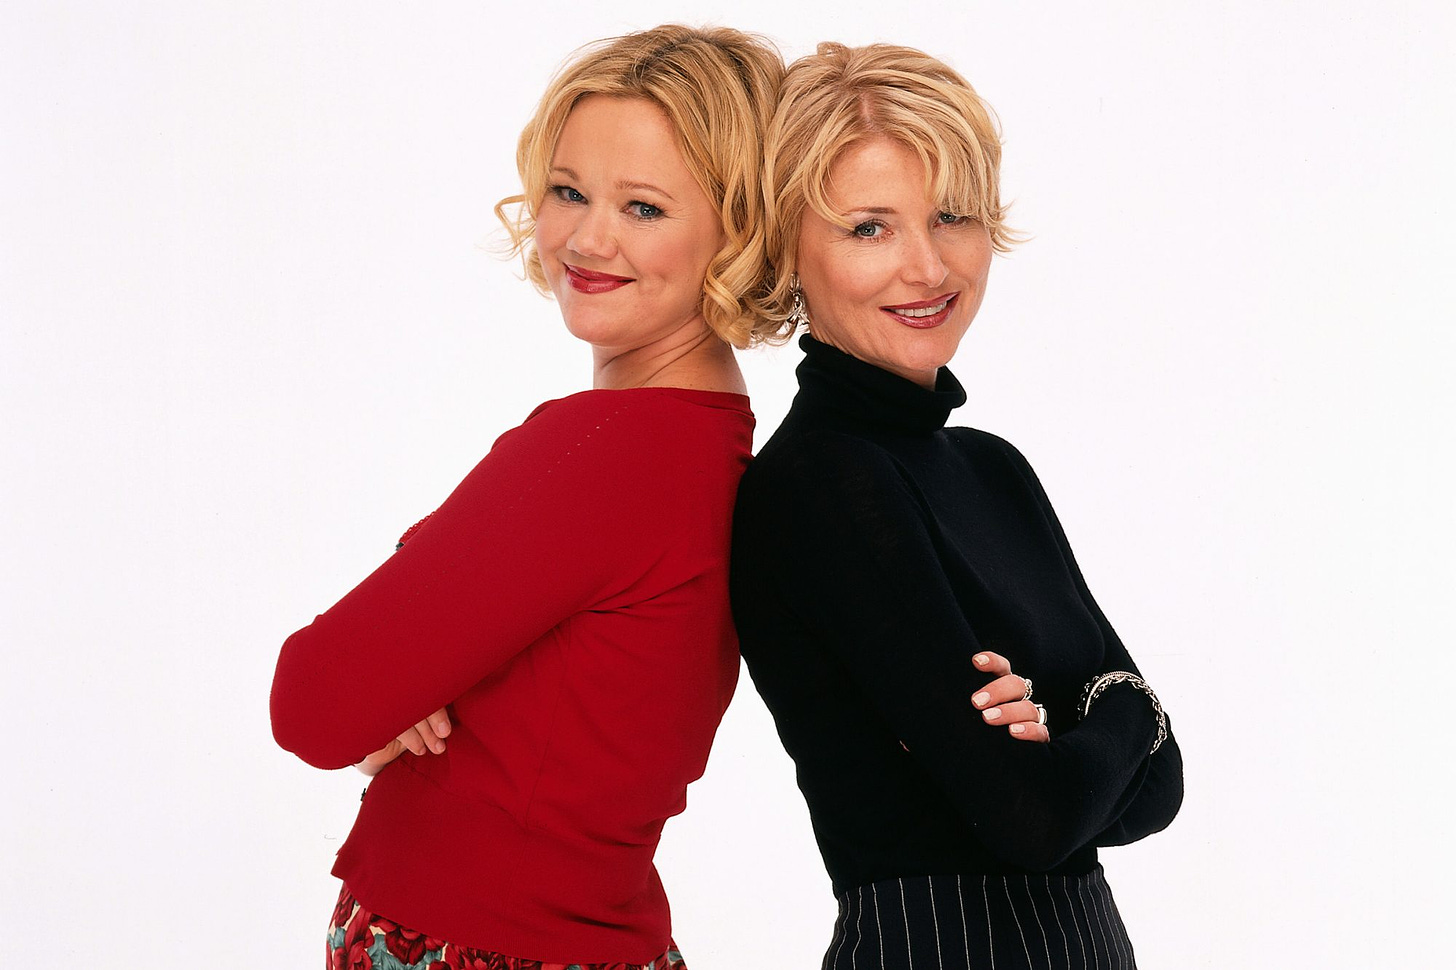 Sabrina the Teenage Witch Original Aunts Reprise Roles in Netflix Reboot |  PEOPLE.com